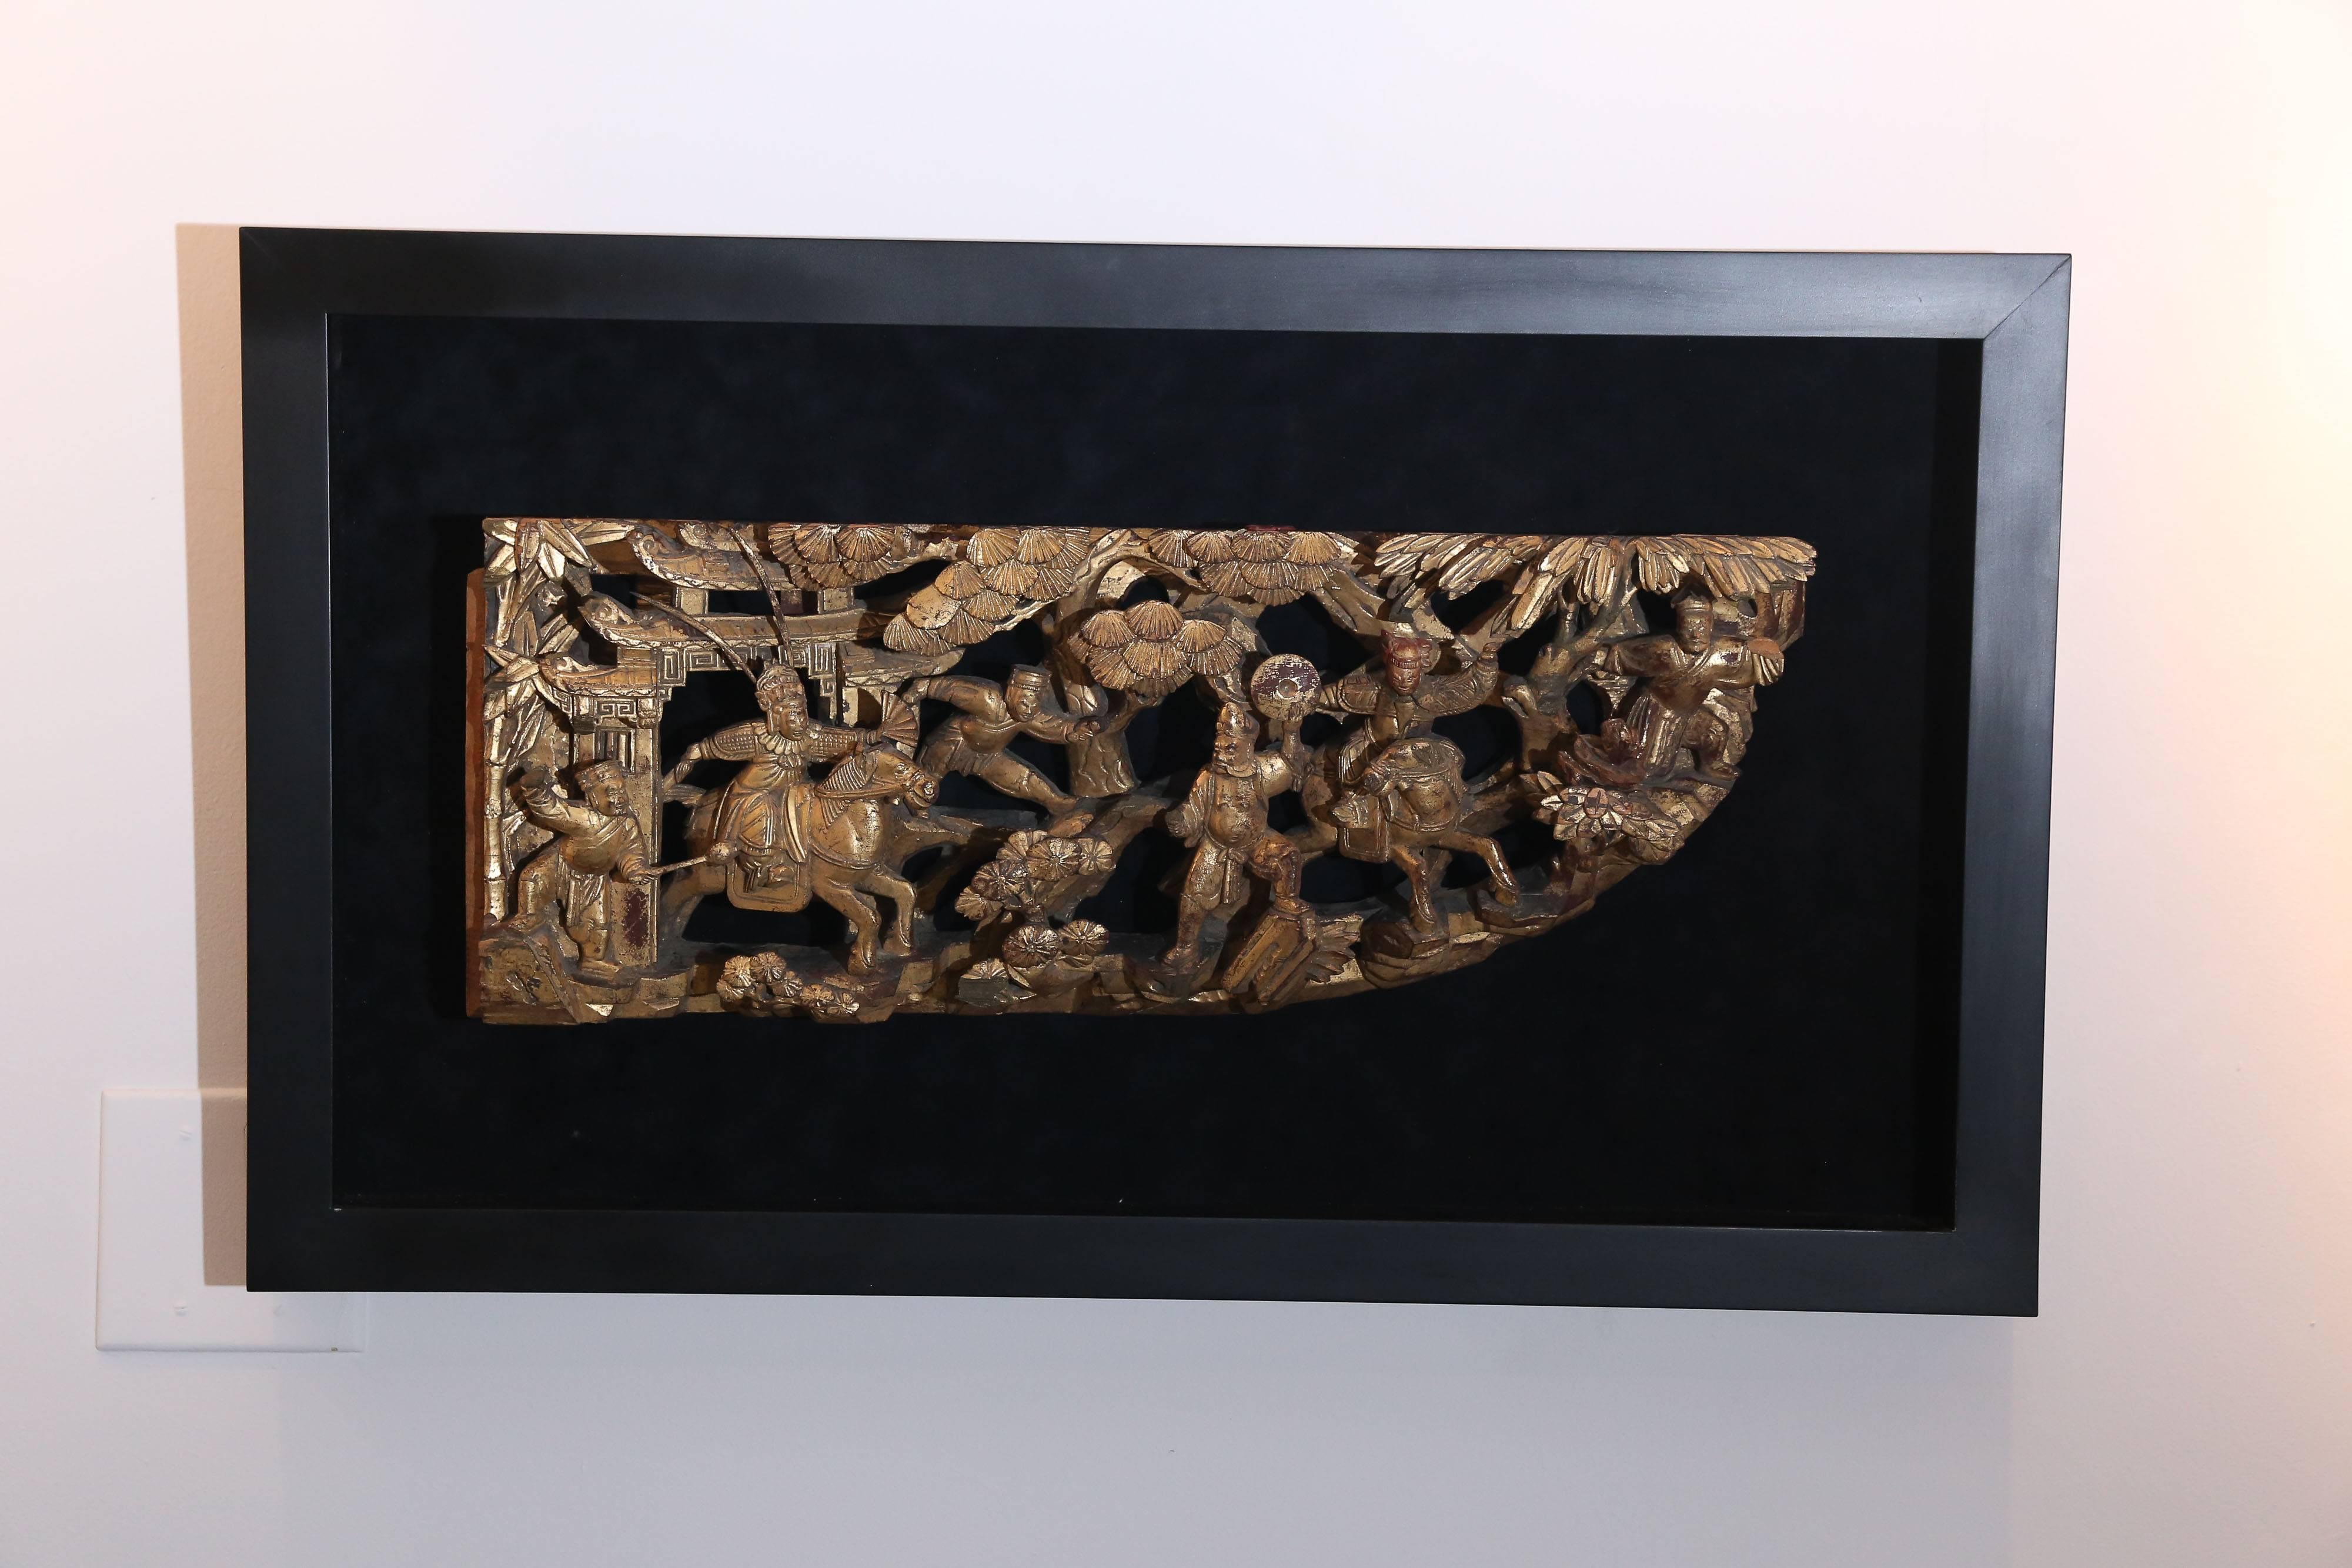 This is a Chinese 19th century architectural fragment, possibly from an elaborate bed or a door frame. Intricately hand-carved, late 19th-early 20th century temple piece suggests faraway places in a different time. In this corner piece appear men in